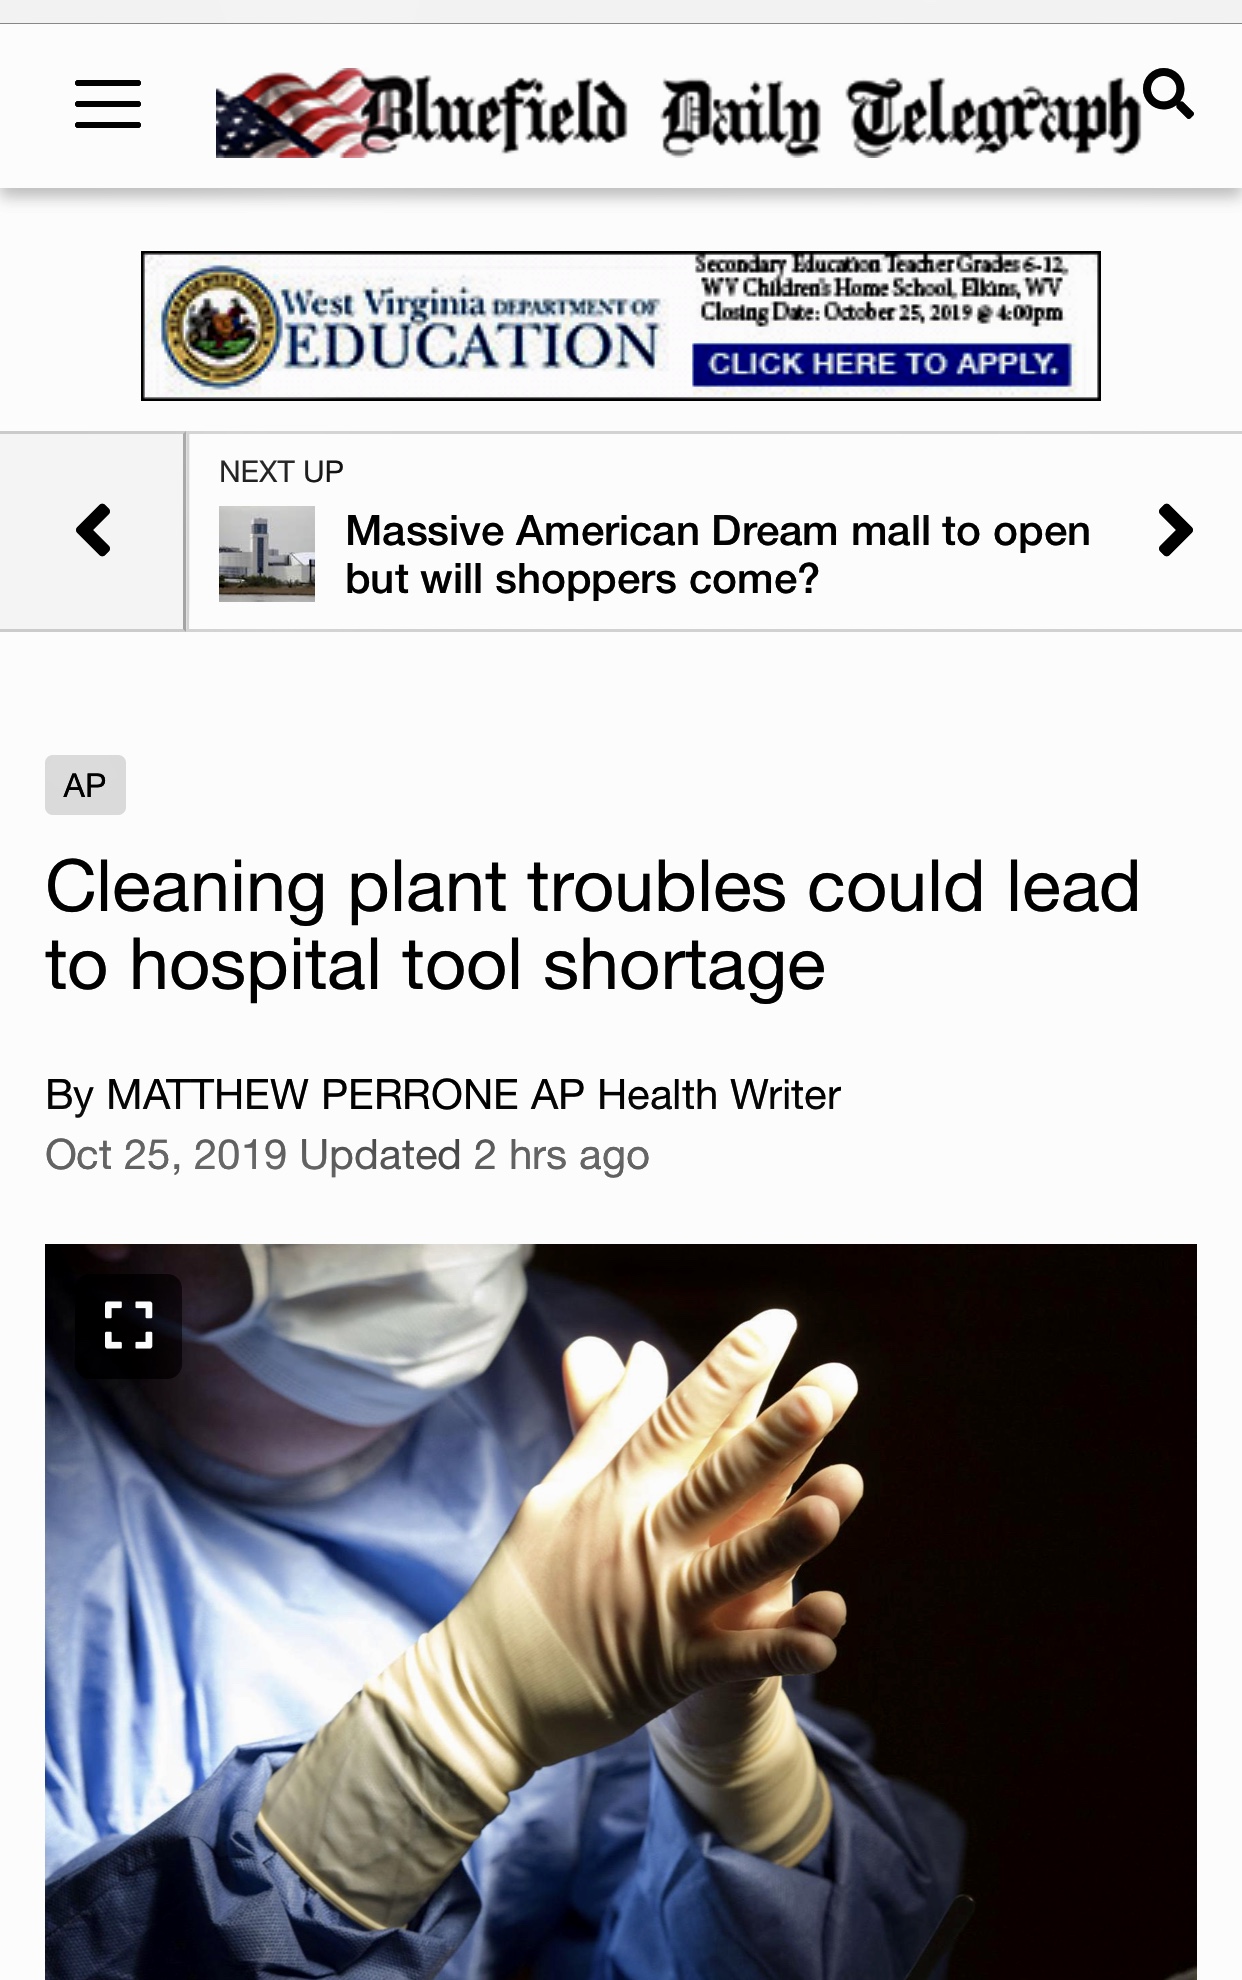 Cleaning plant troubles could lead to hospital tool shortage